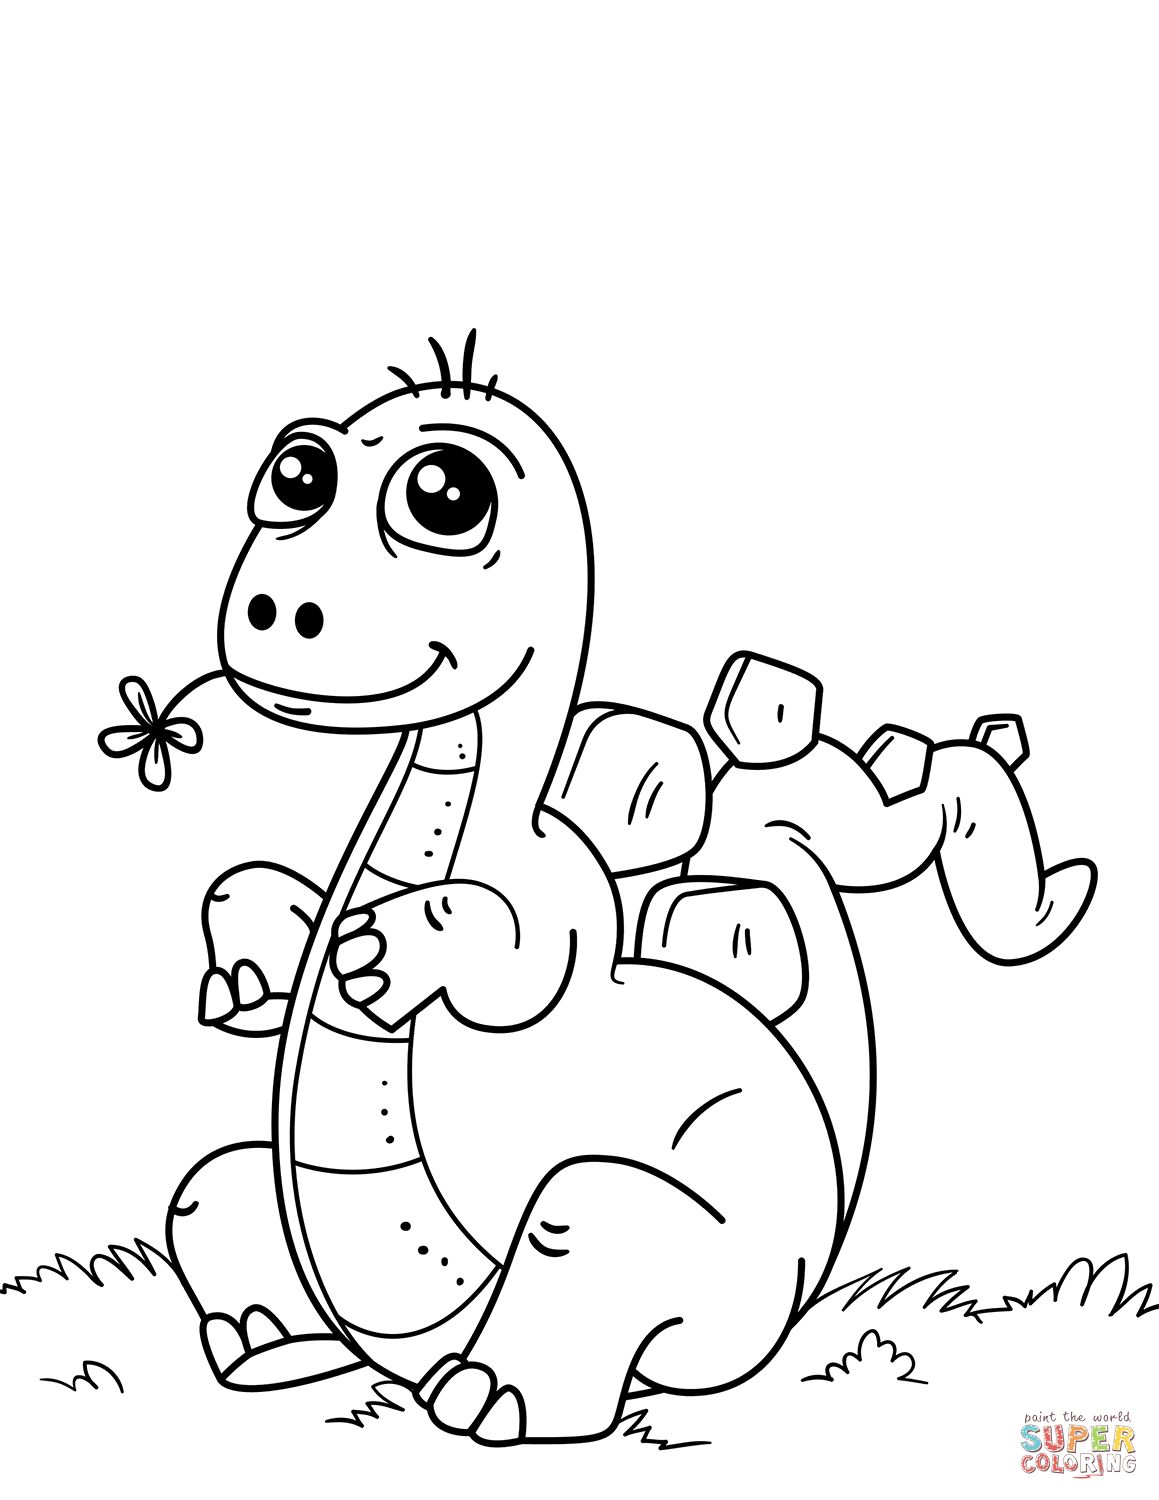 Cute Dinosaur Coloring Pages For Kids at GetColorings.com | Free